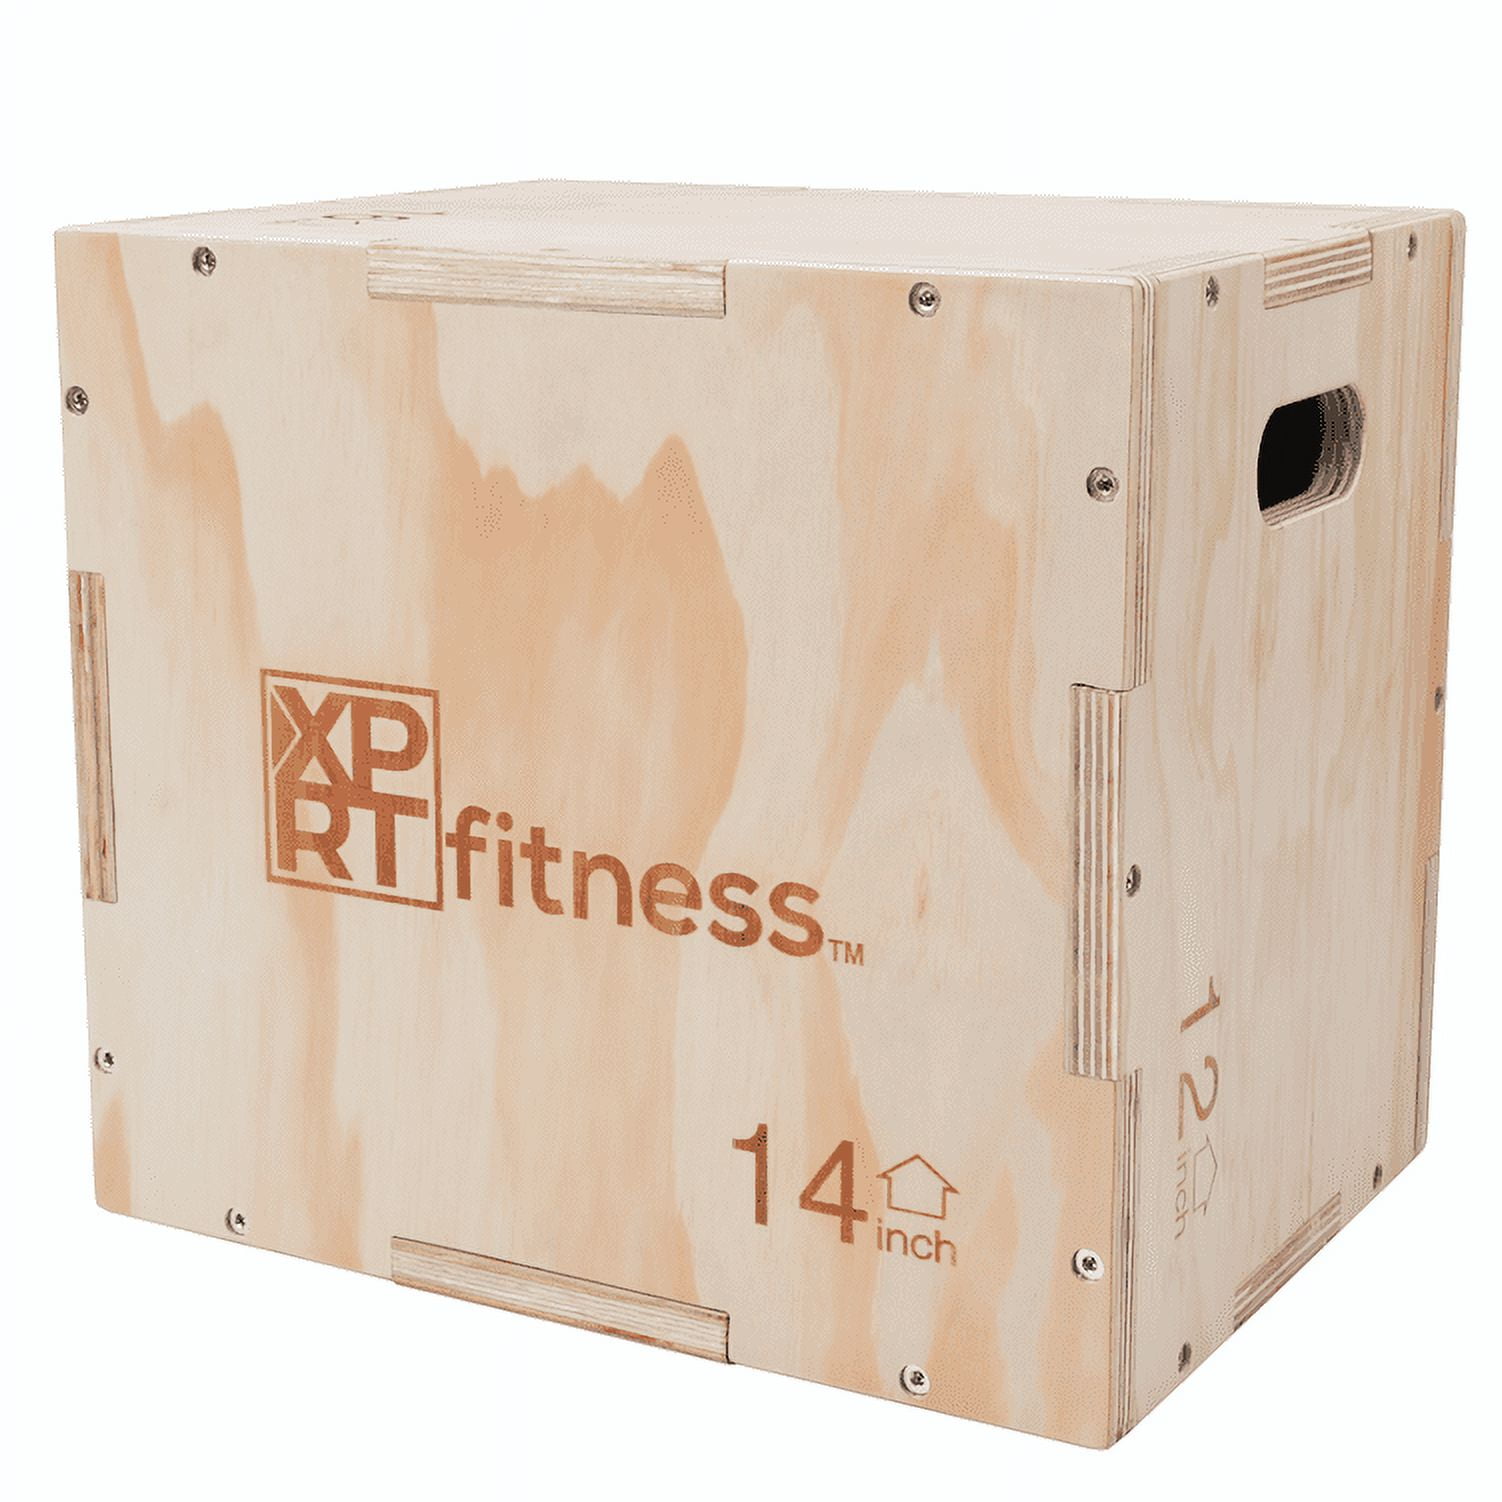 The Pro's Guide to Box Jump Exercises and Workouts - Onnit Academy